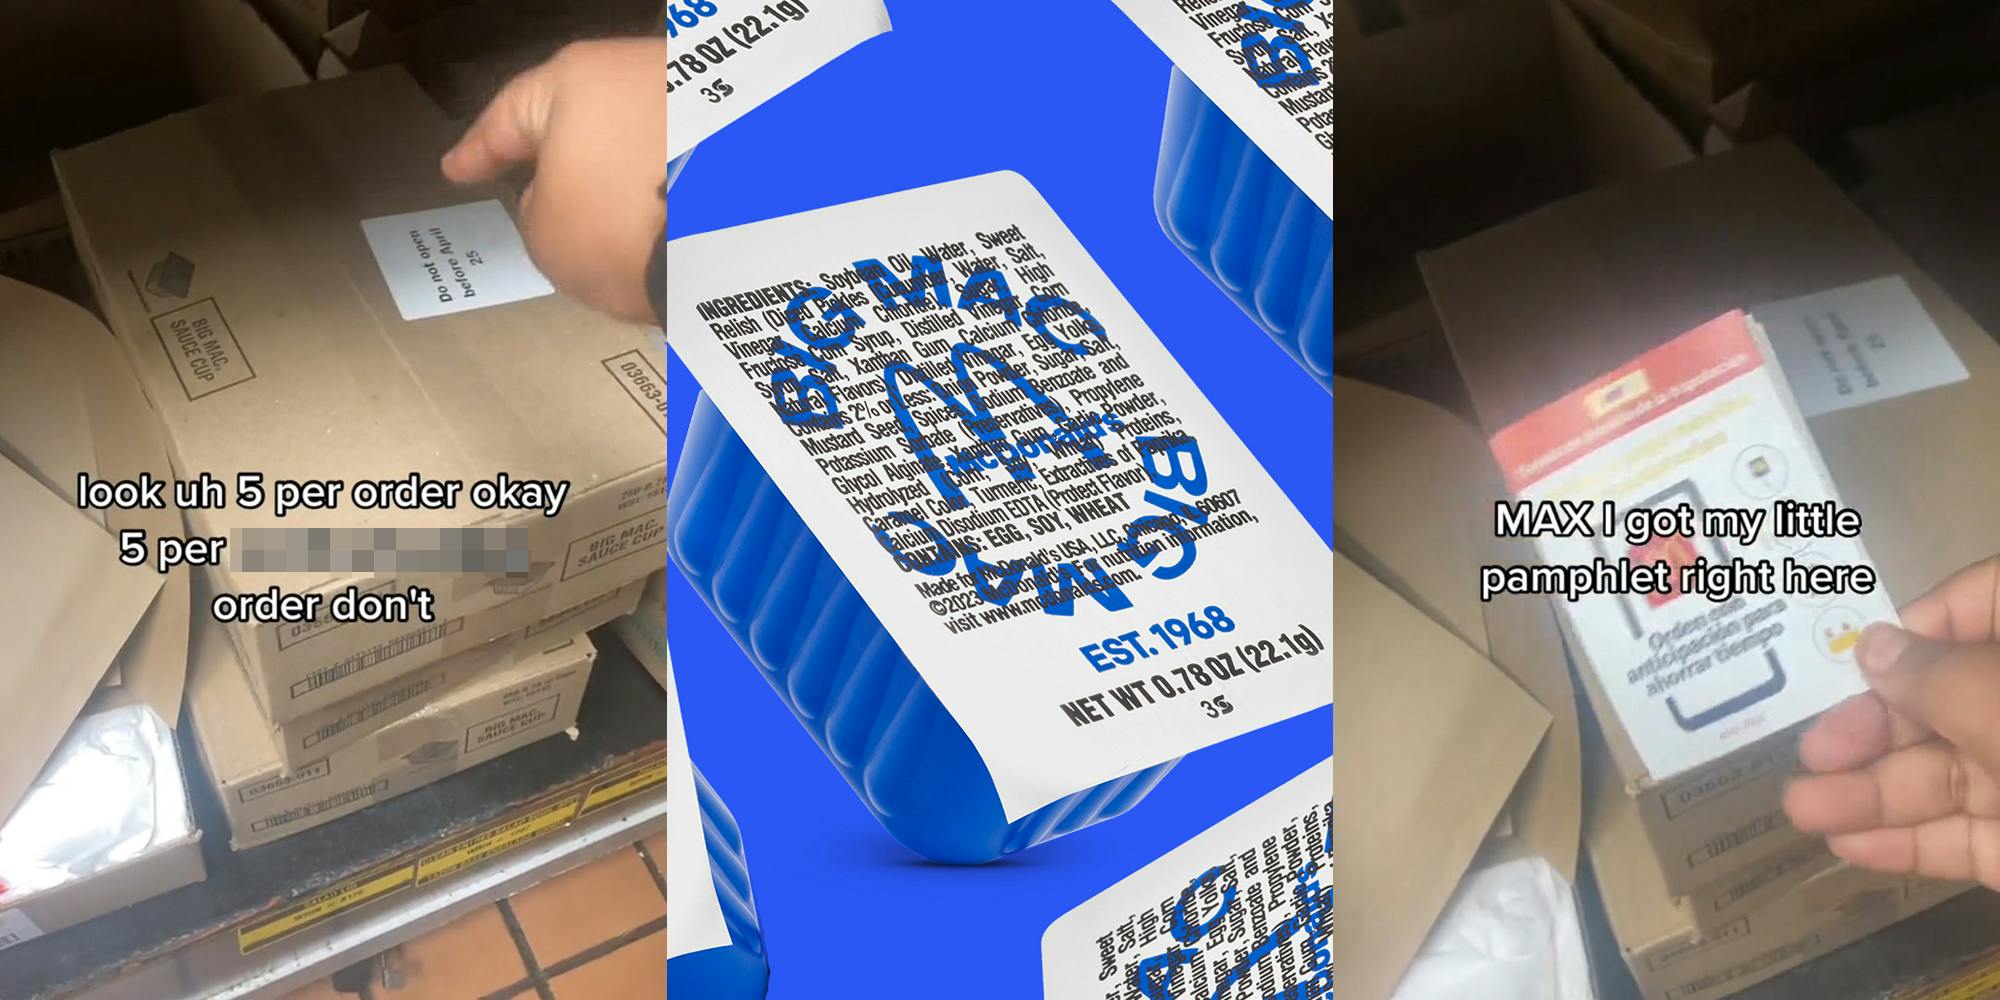 box of Big Mac sauce at McDonald's with caption "look uh 5 per order ok 5 per blank order don't" (l) Big Mac sauces in containers in front of blue background (c) box of Big Mac sauce at McDonald's with caption "MAX I got my little pamphlet right here" (r)